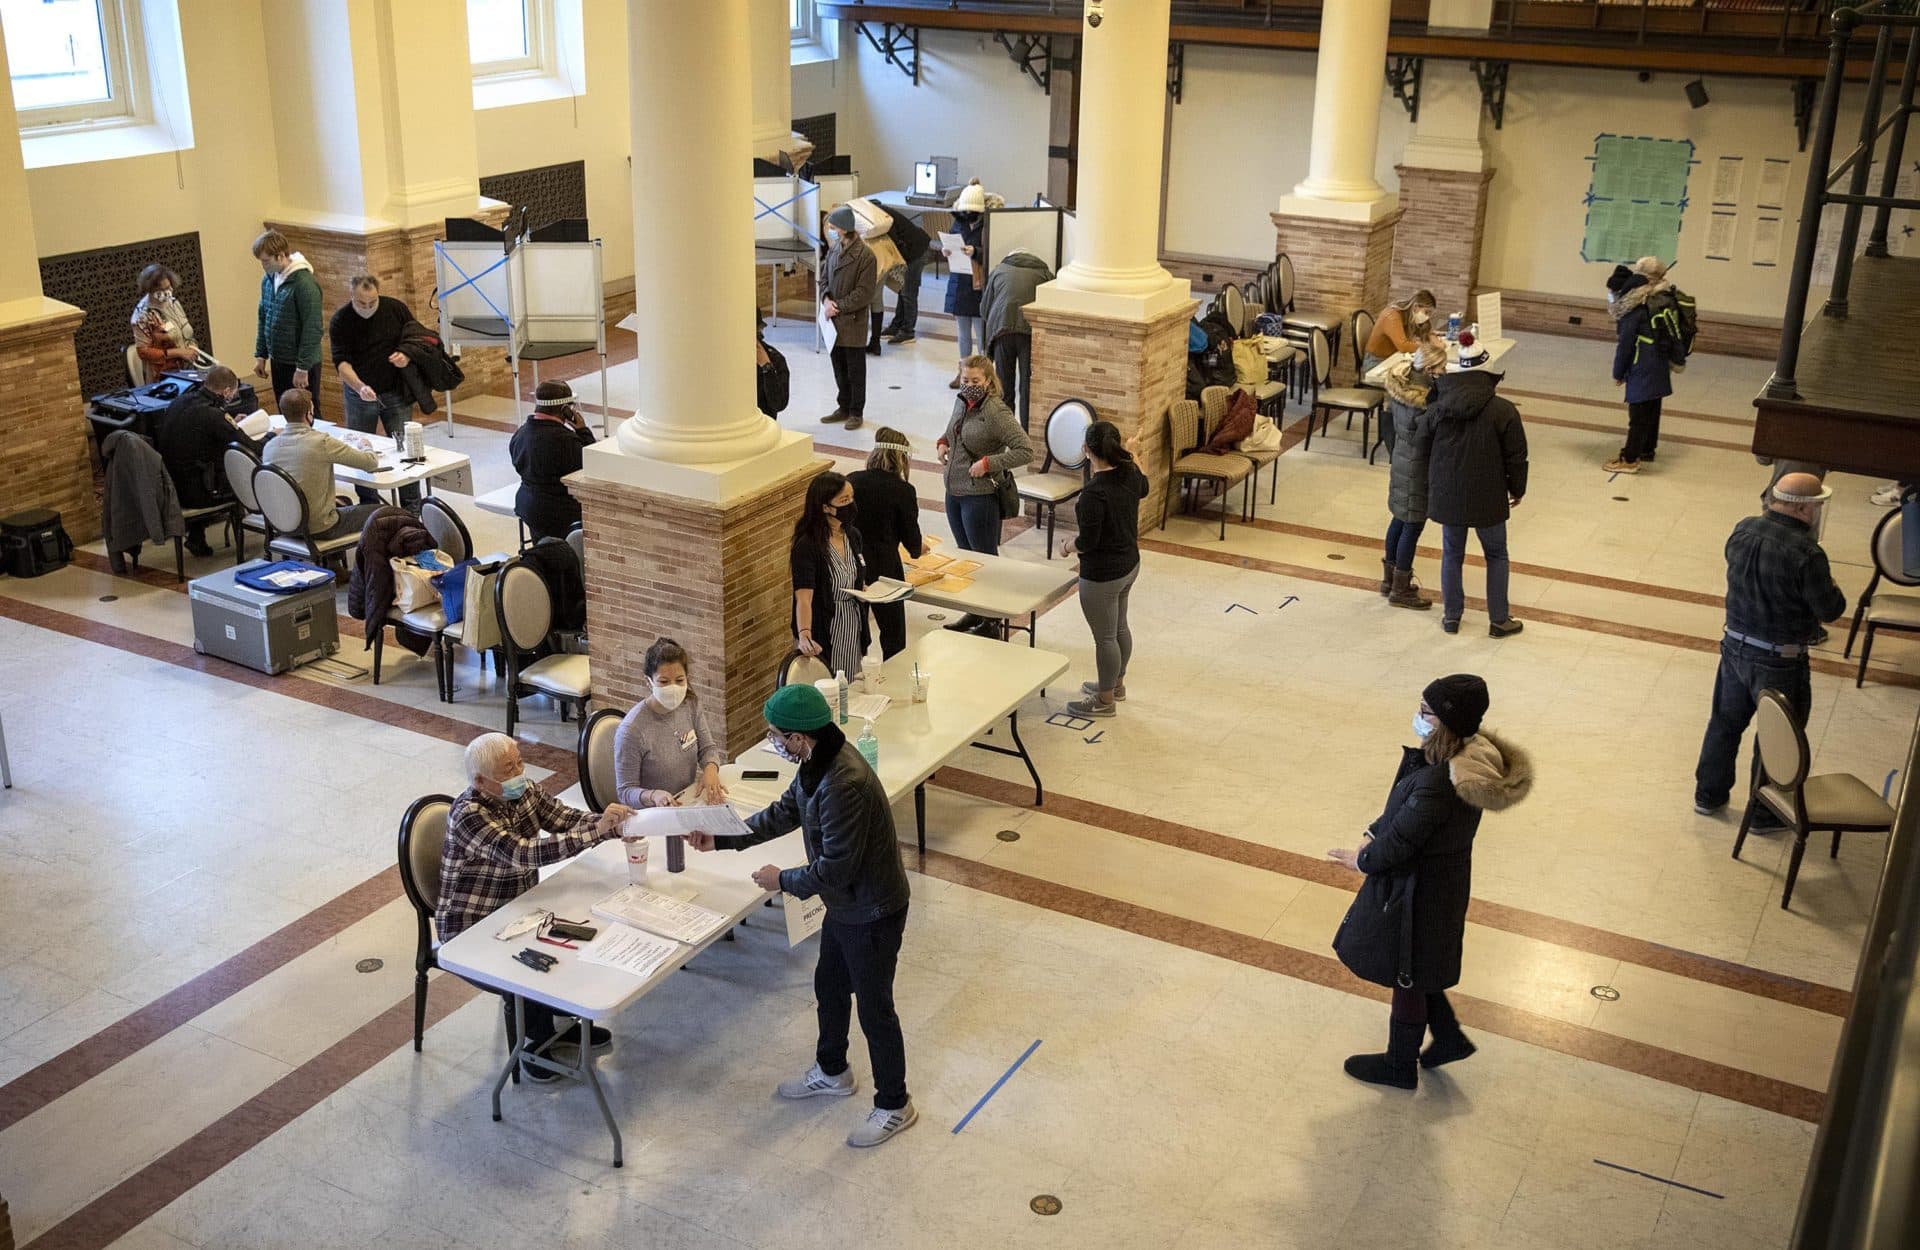 Voting gets underway at the Gustavino Room at the Boston Public Library. (Robin Lubbock/WBUR)